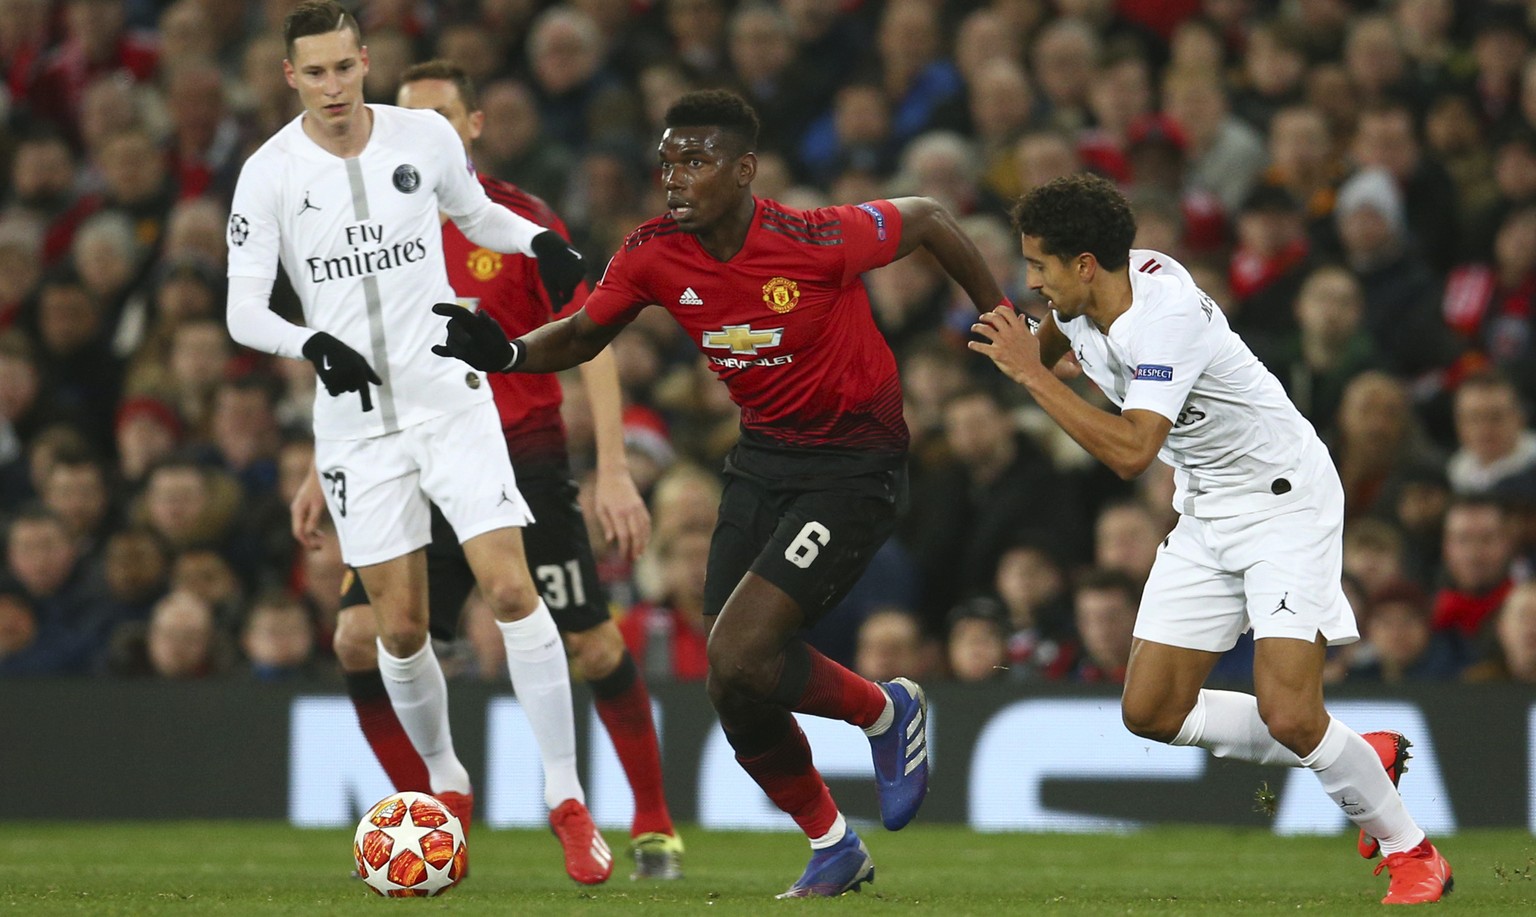 Manchester United&#039;s Paul Pogba, centre, vies for the ball with Paris Saint Germain&#039;s Marcos Marquinhos, right, during the Champions League round of 16 soccer match between Manchester United  ...